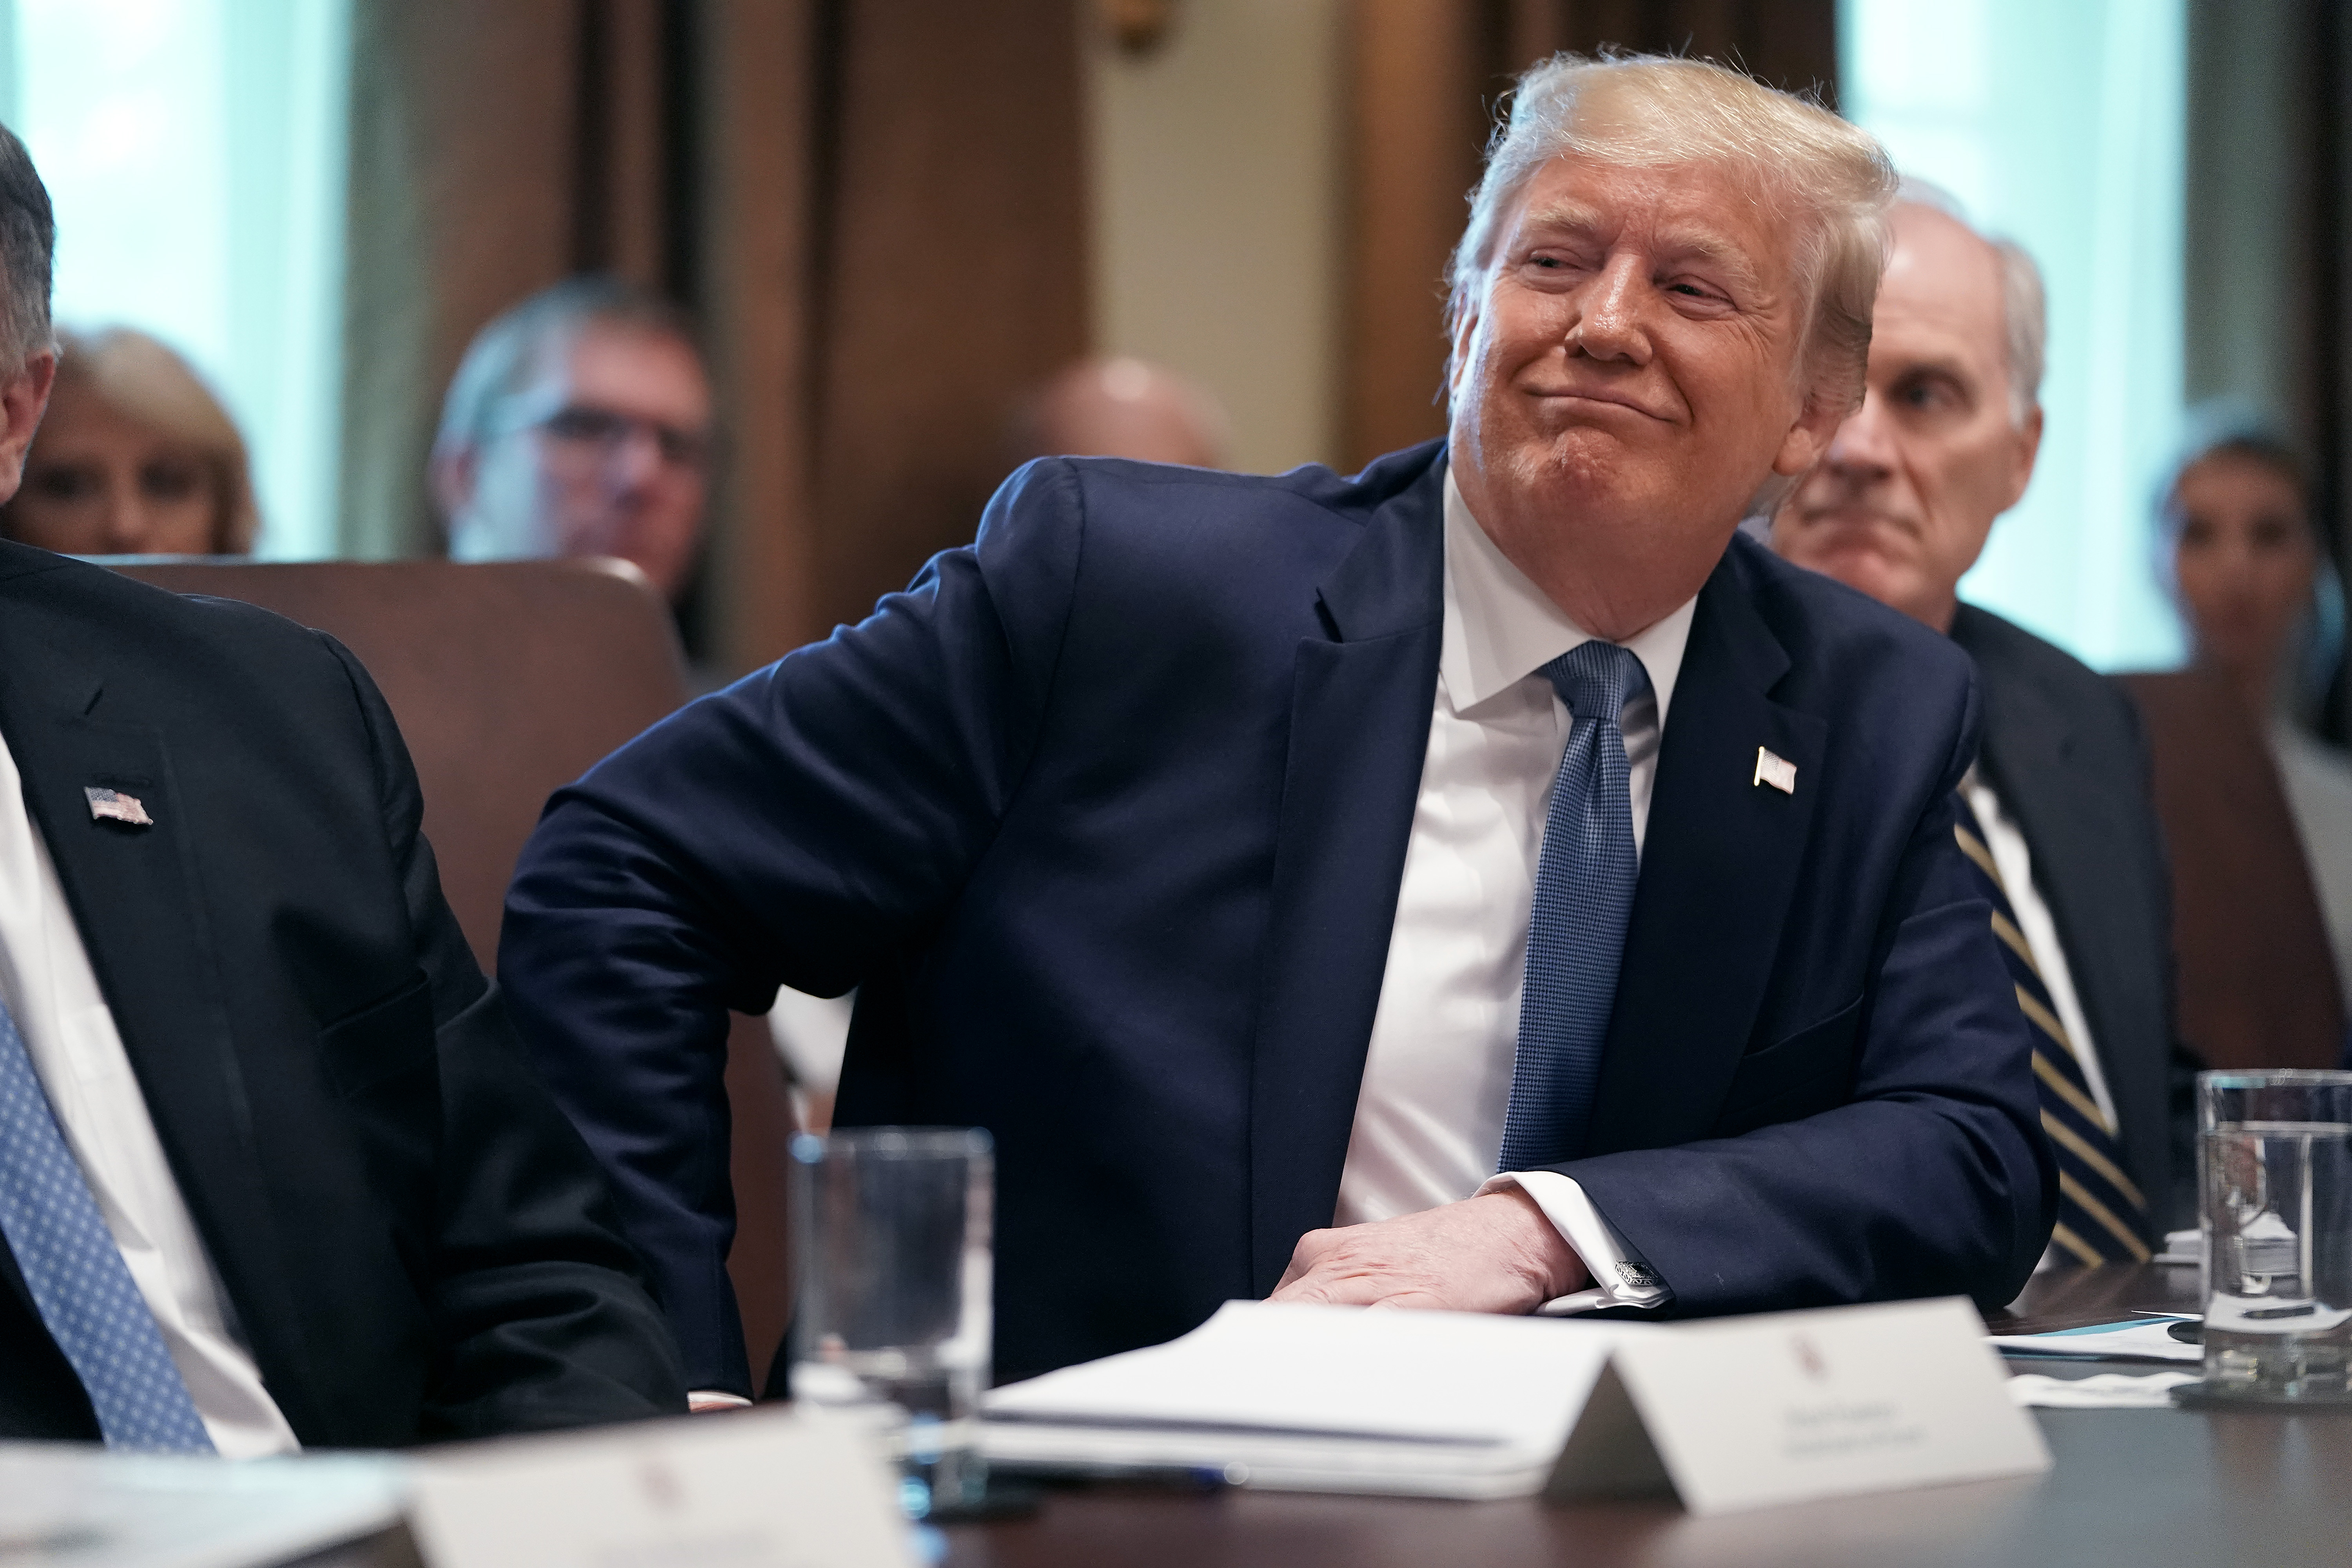 WASHINGTON, DC - JULY 16: U.S. President Donald Trump (C) leads a cabinet meeting at the White House July 16, 2019 in Washington, DC. Trump and members of his administration addressed a wide variety of subjects, including Iran, opportunity zones, drug prices, HIV/AIDS, immigration and other subjects for more than an hour. (Photo by Chip Somodevilla/Getty Images)